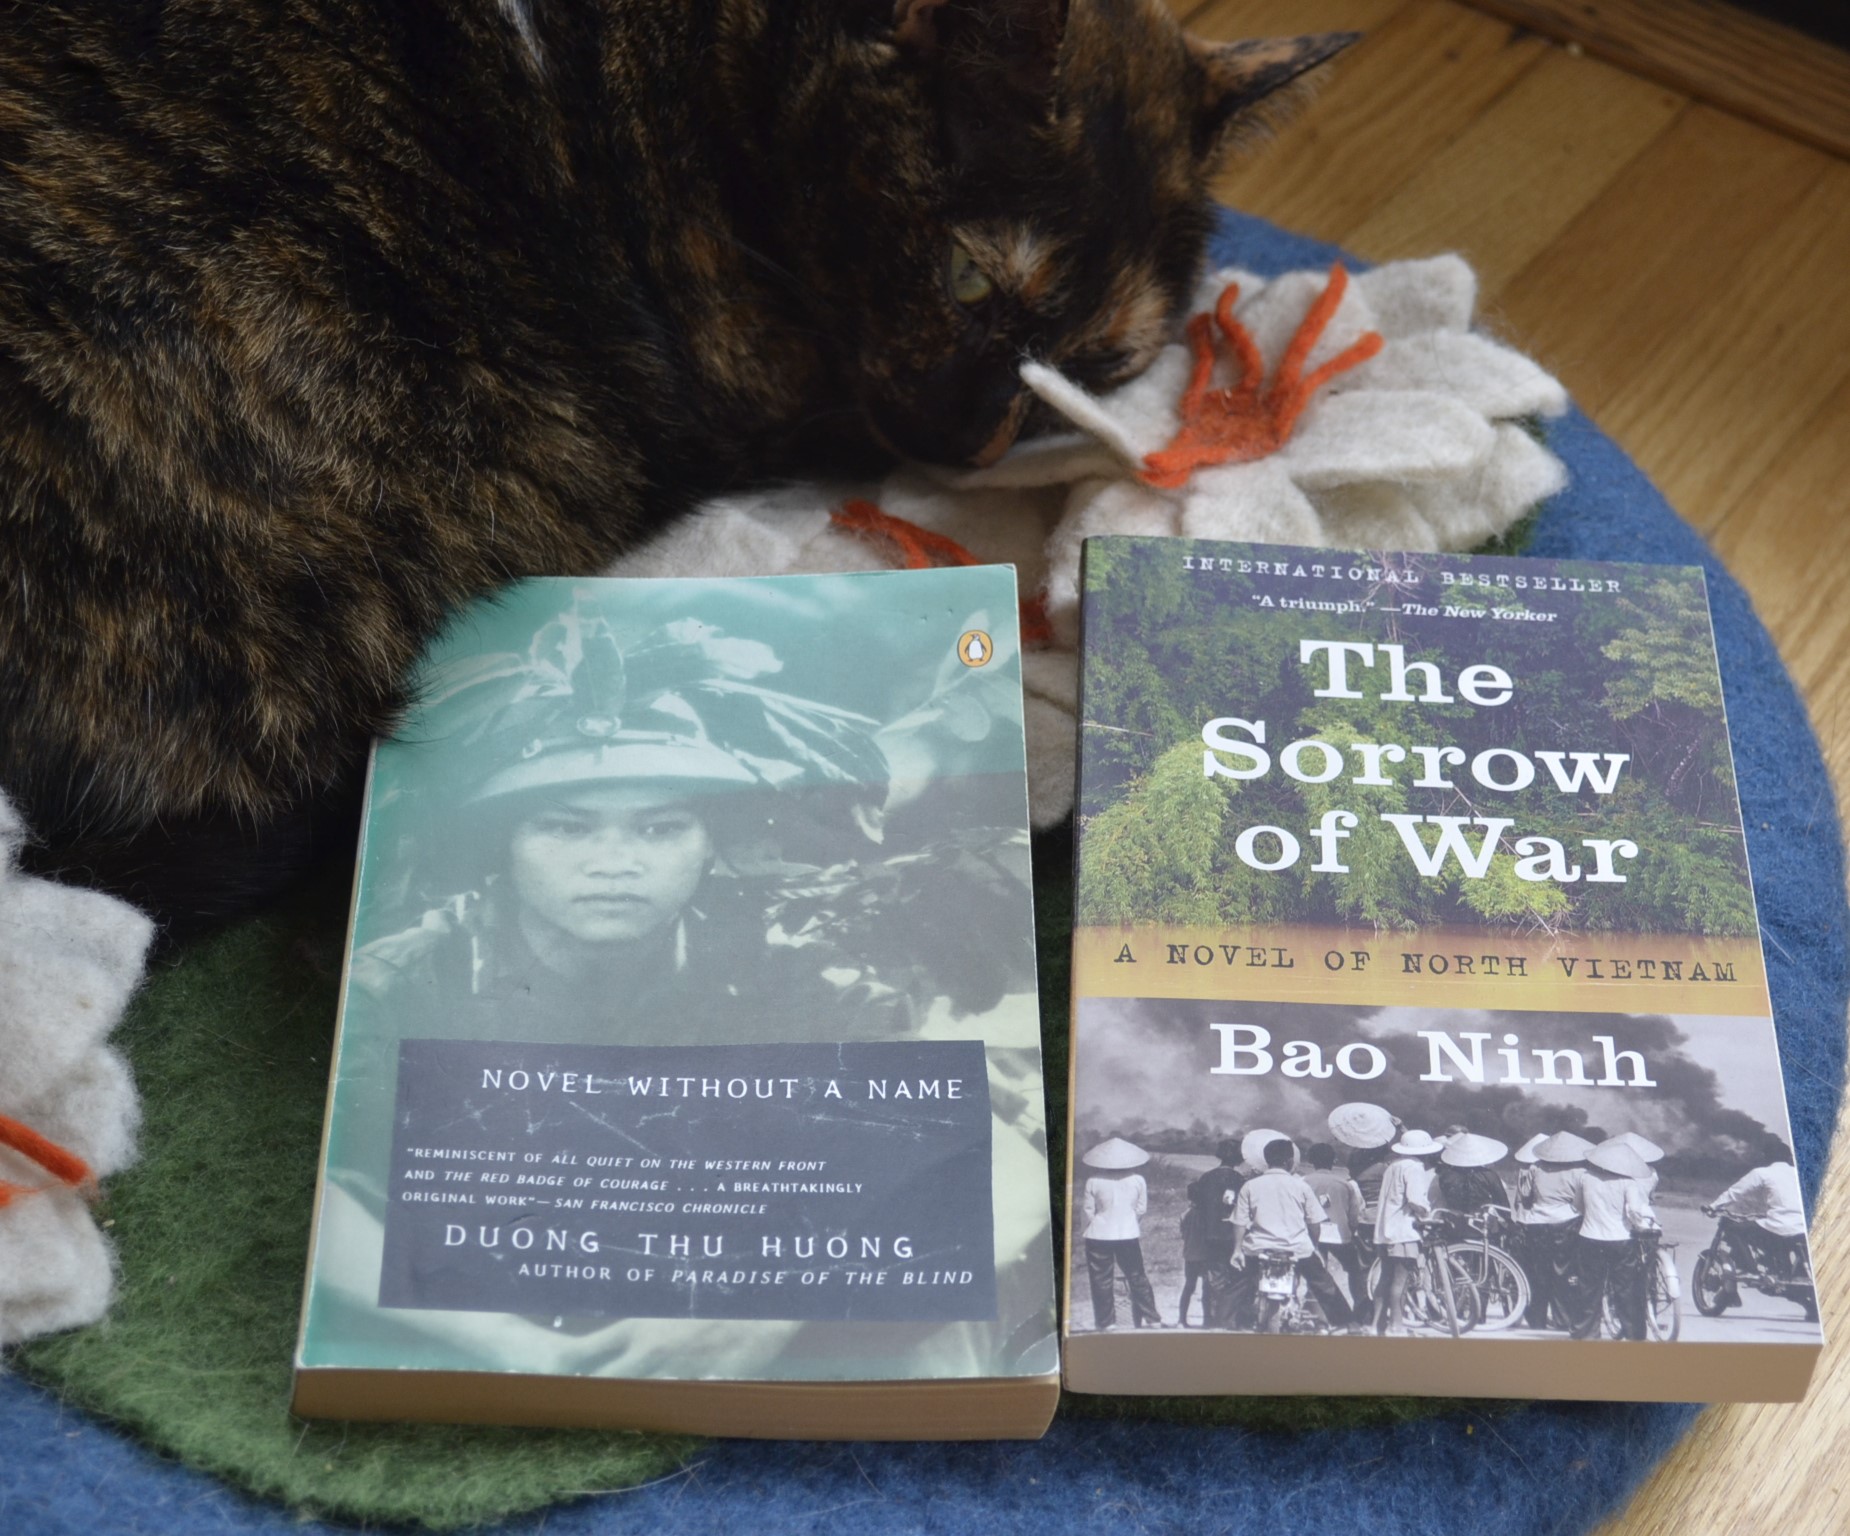 The Sorrow of War and Novel Without a Name are laid side-by-side on a cat bed. A tortoiseshell cat sleeps beside them.